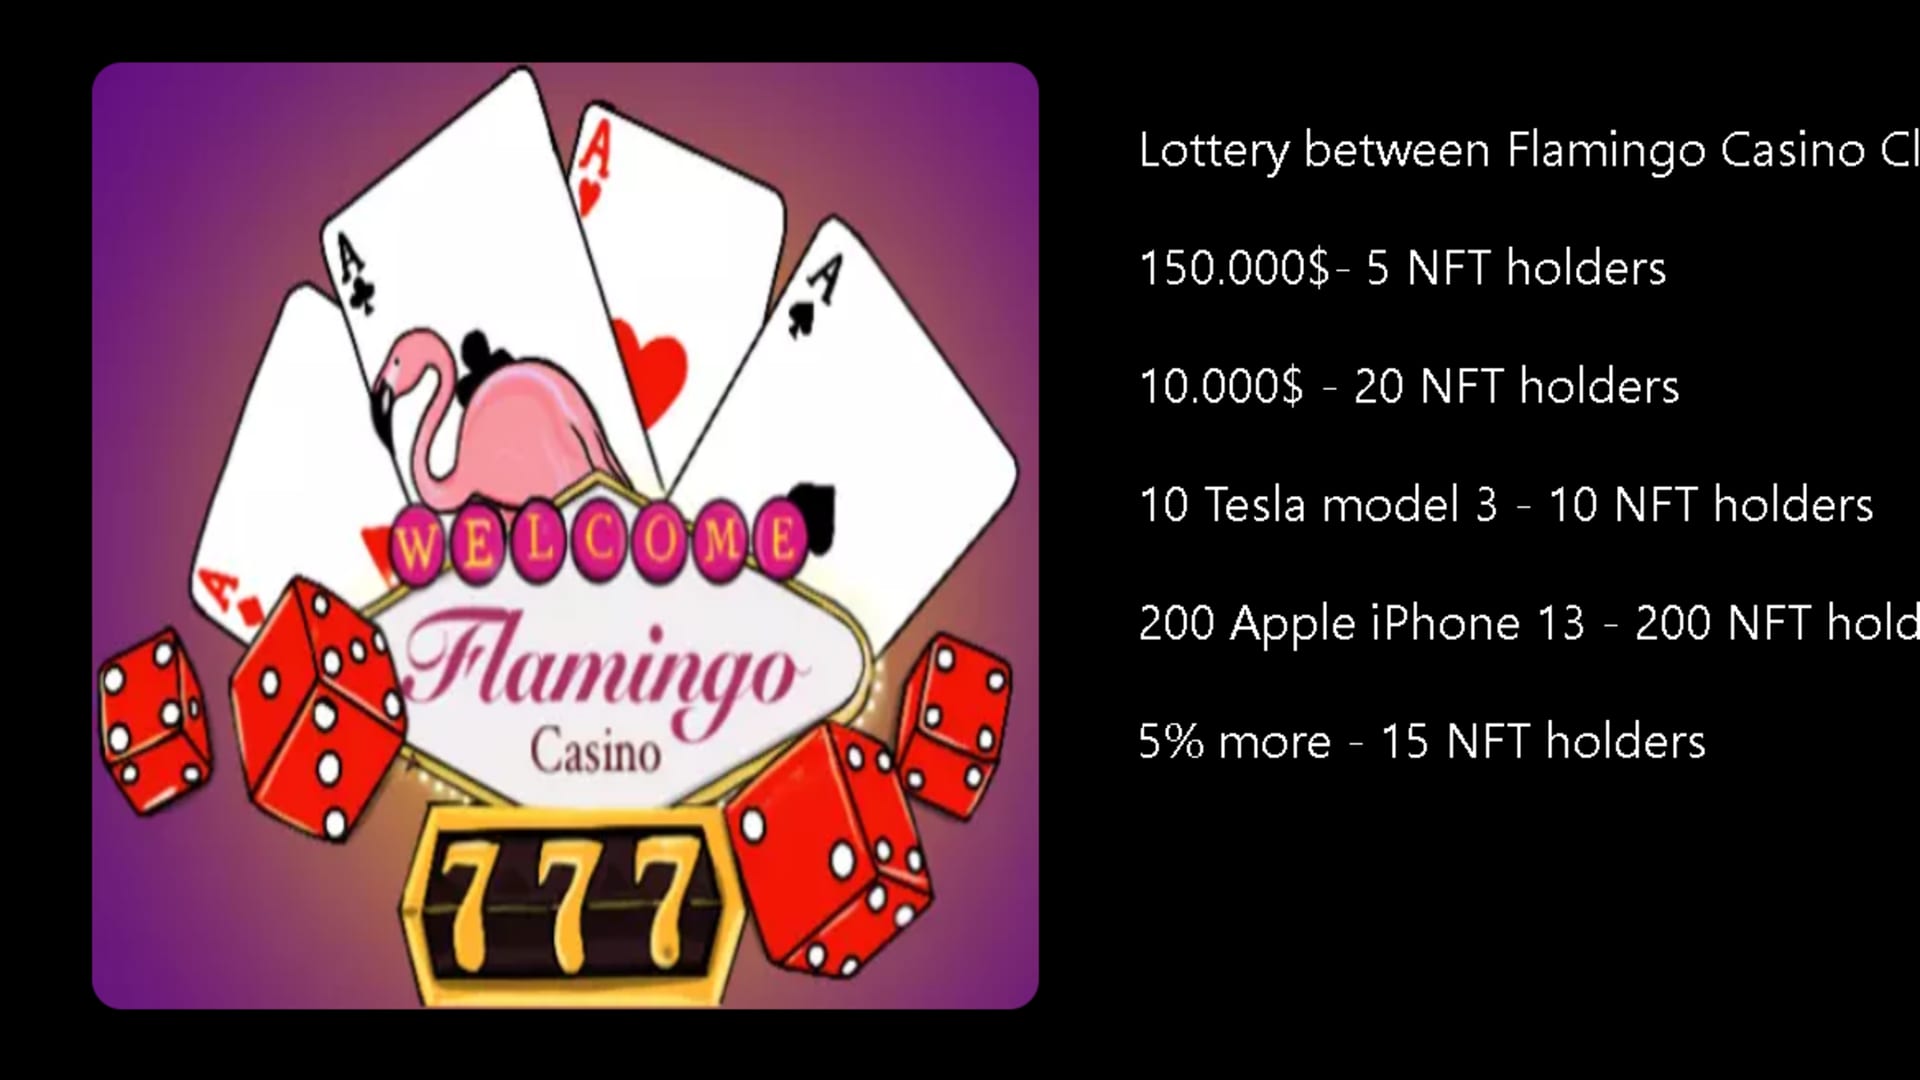 Screenshot taken from Flamingo Casino Club’s website which says NFT holders are eligible for prizes, such as Teslas and iPhones.